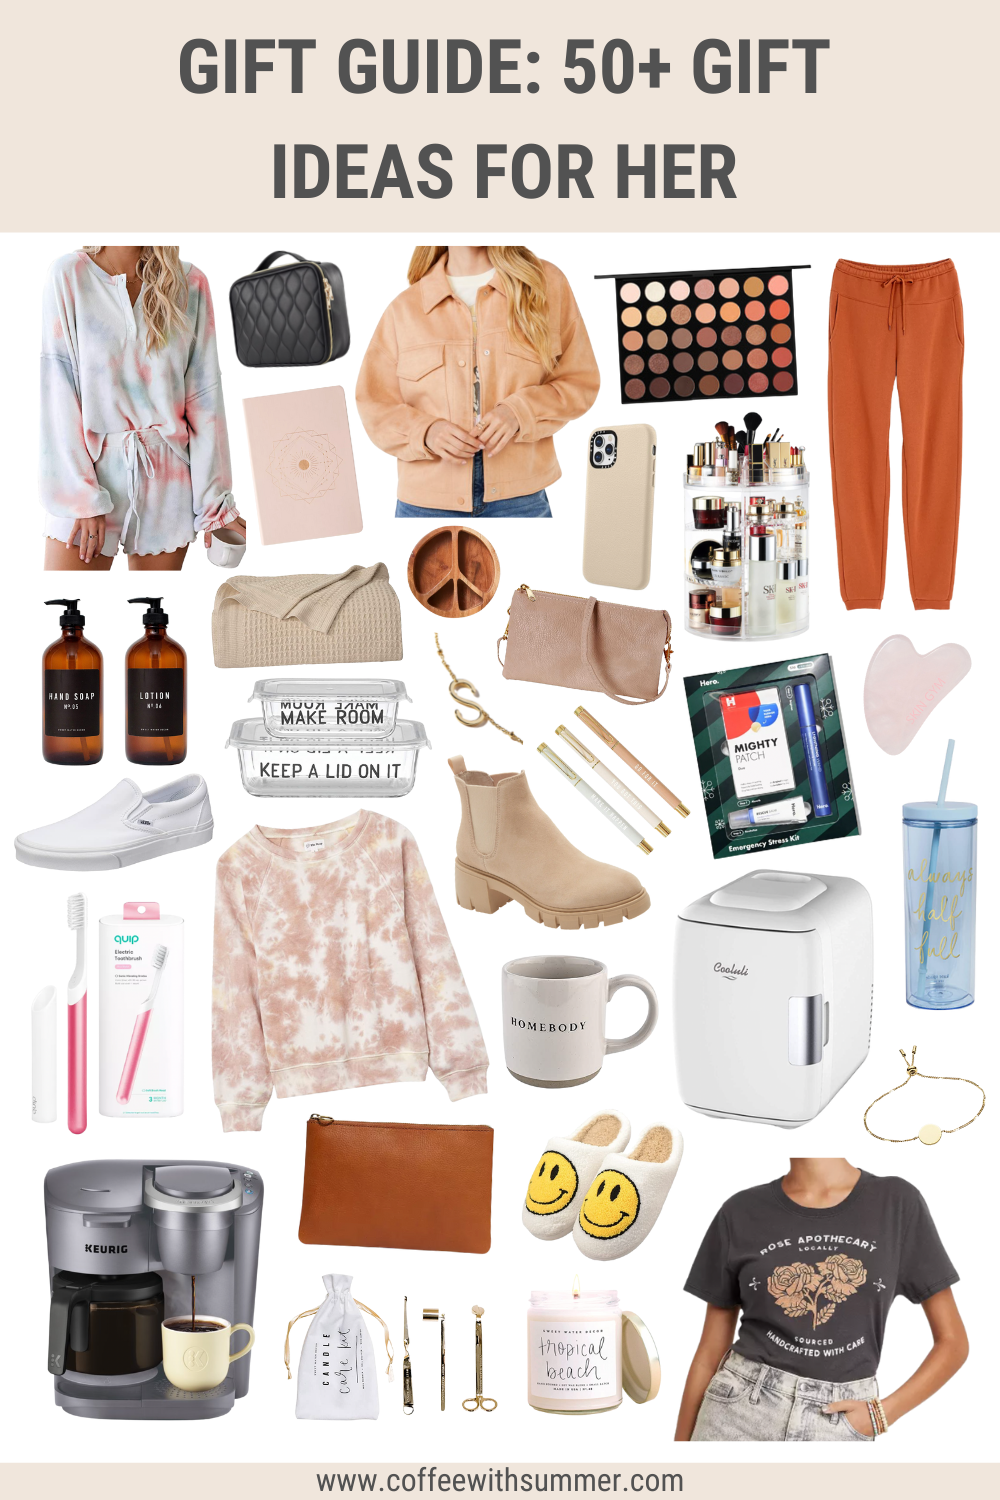 Gift Guide: 50+ Gift Ideas For Her - Coffee With Summer